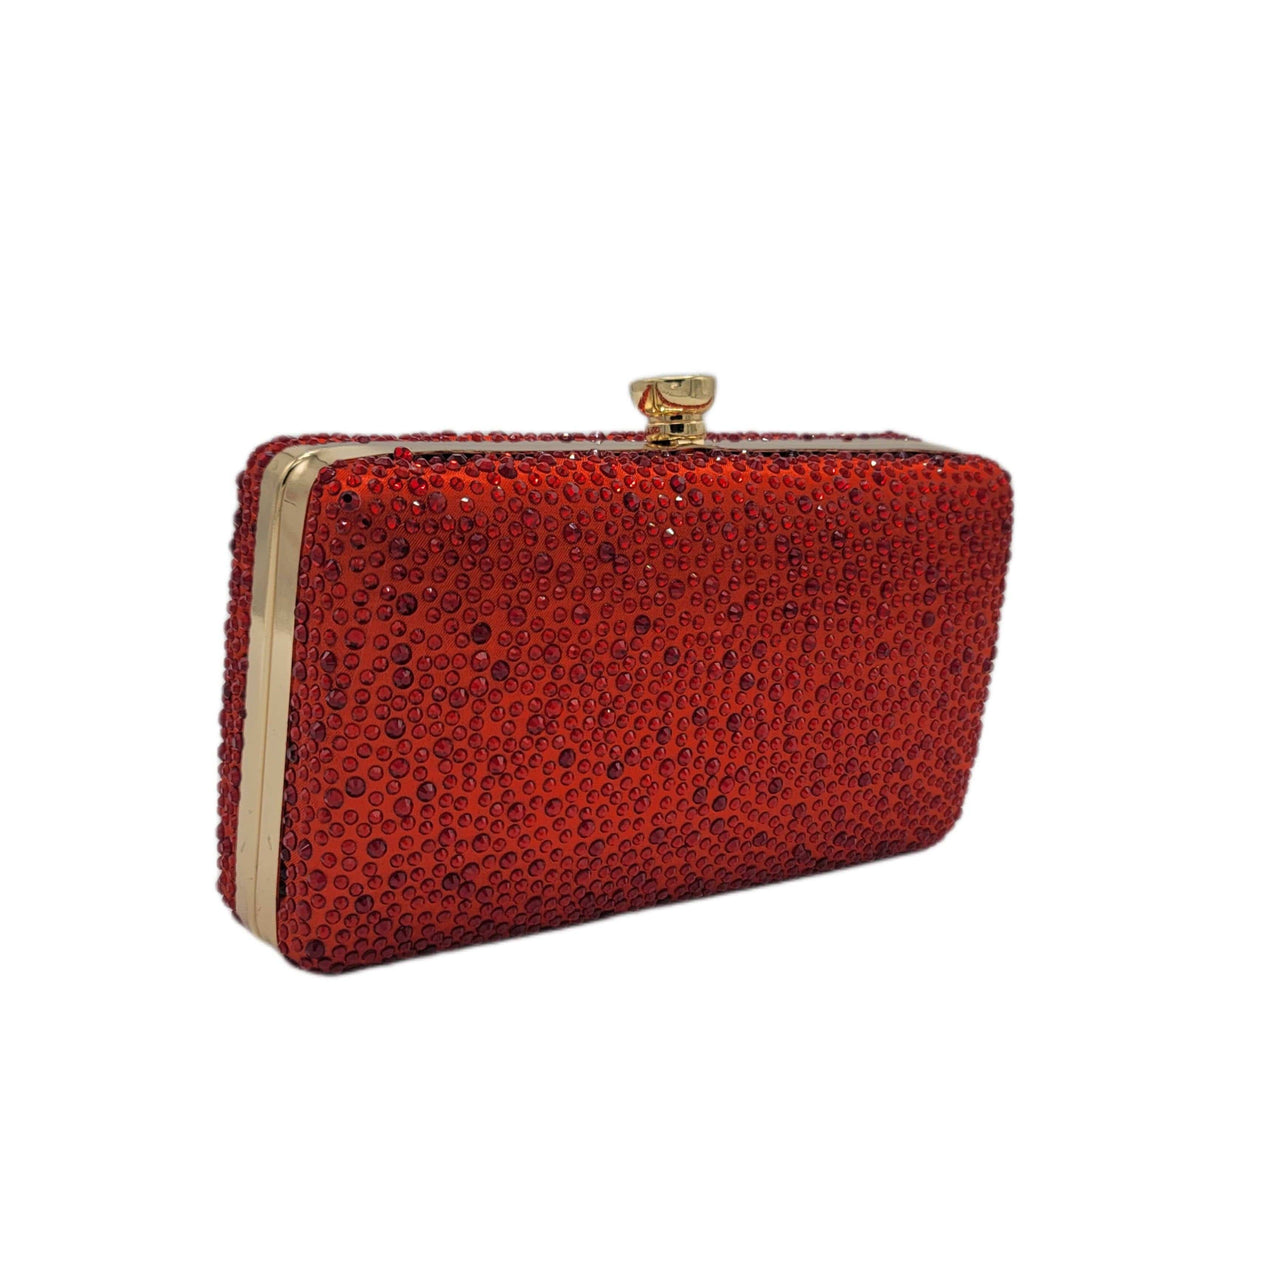 The Bag Couture Handbags, Wallets & Cases Stone Embellished Clutch 2 Red